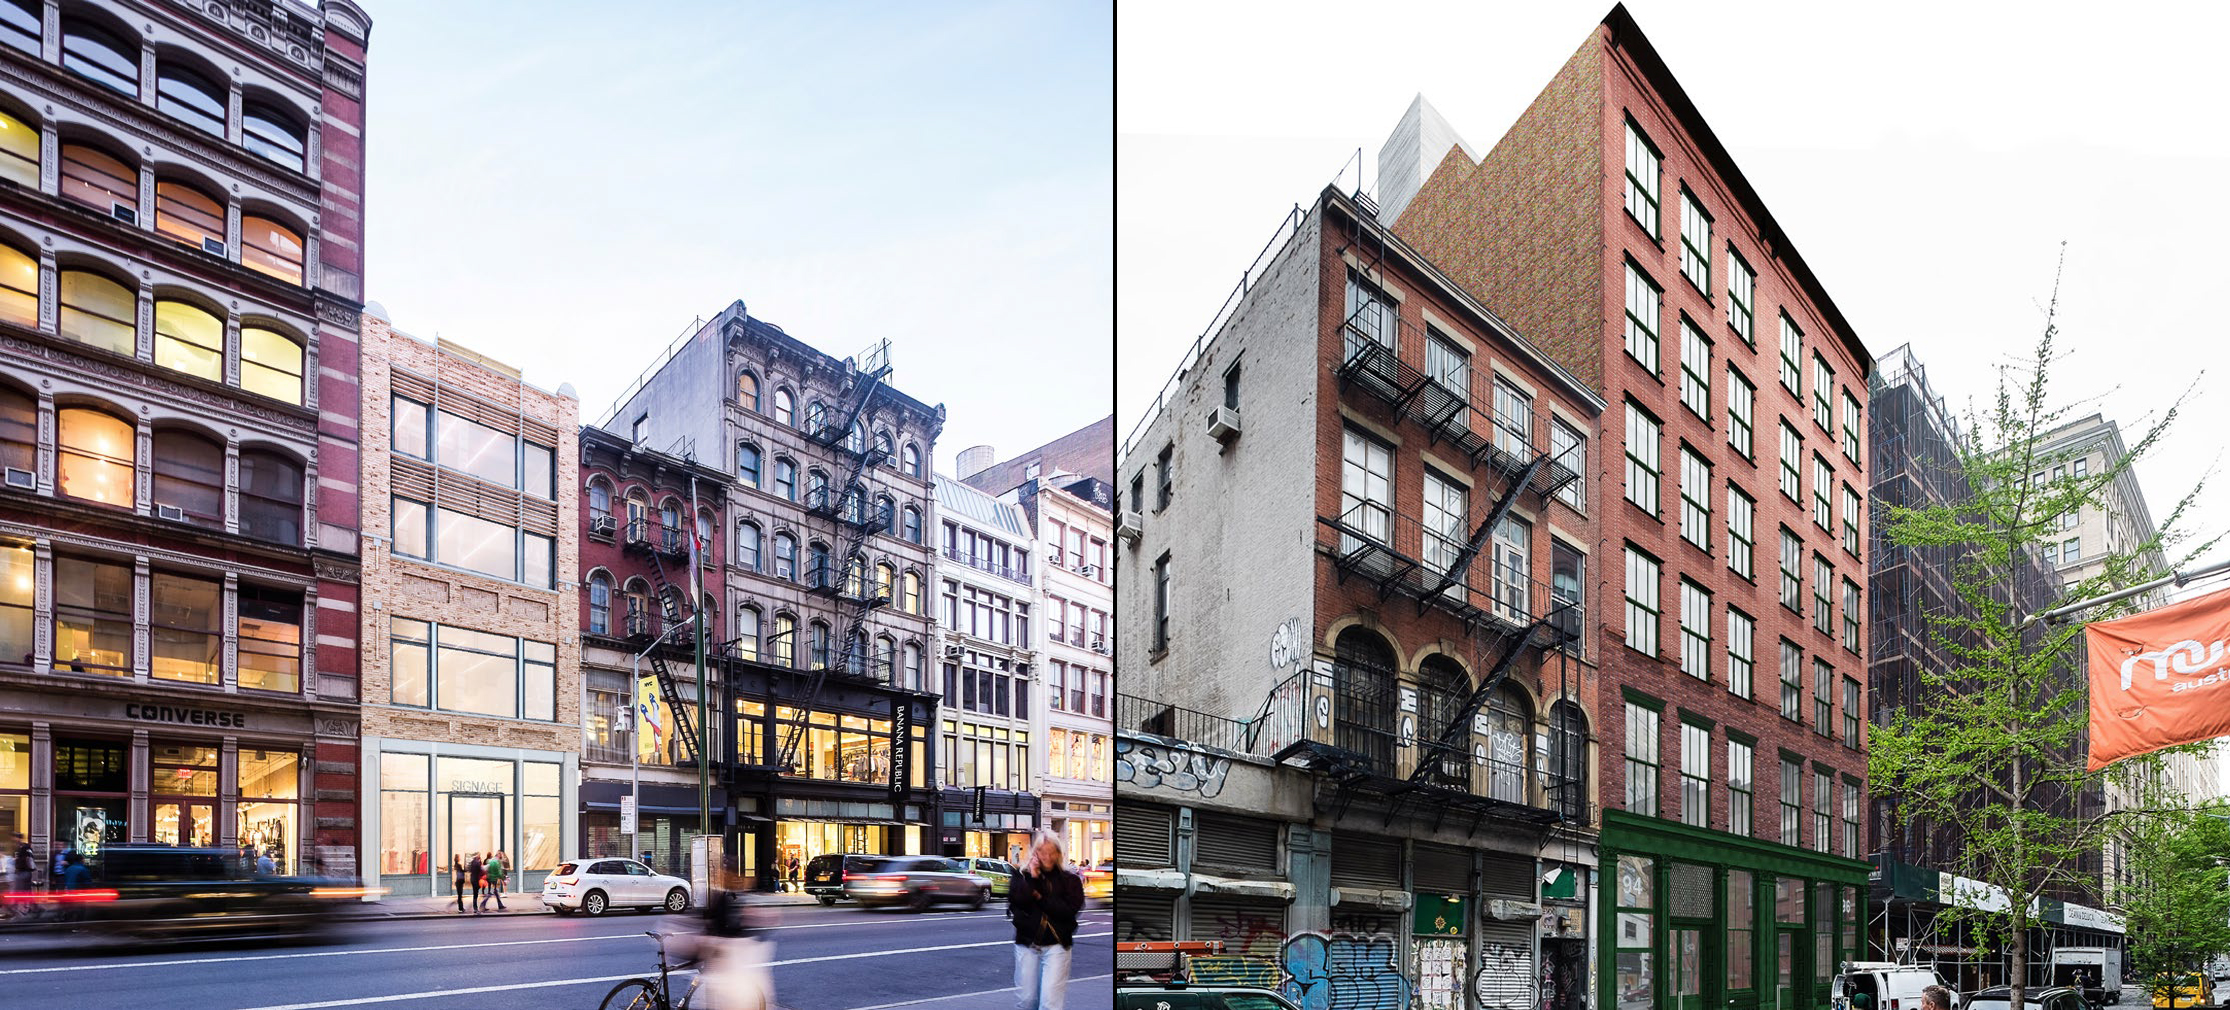 Proposals for 558 Broadway (left) and 94-96 Crosby Street (right)